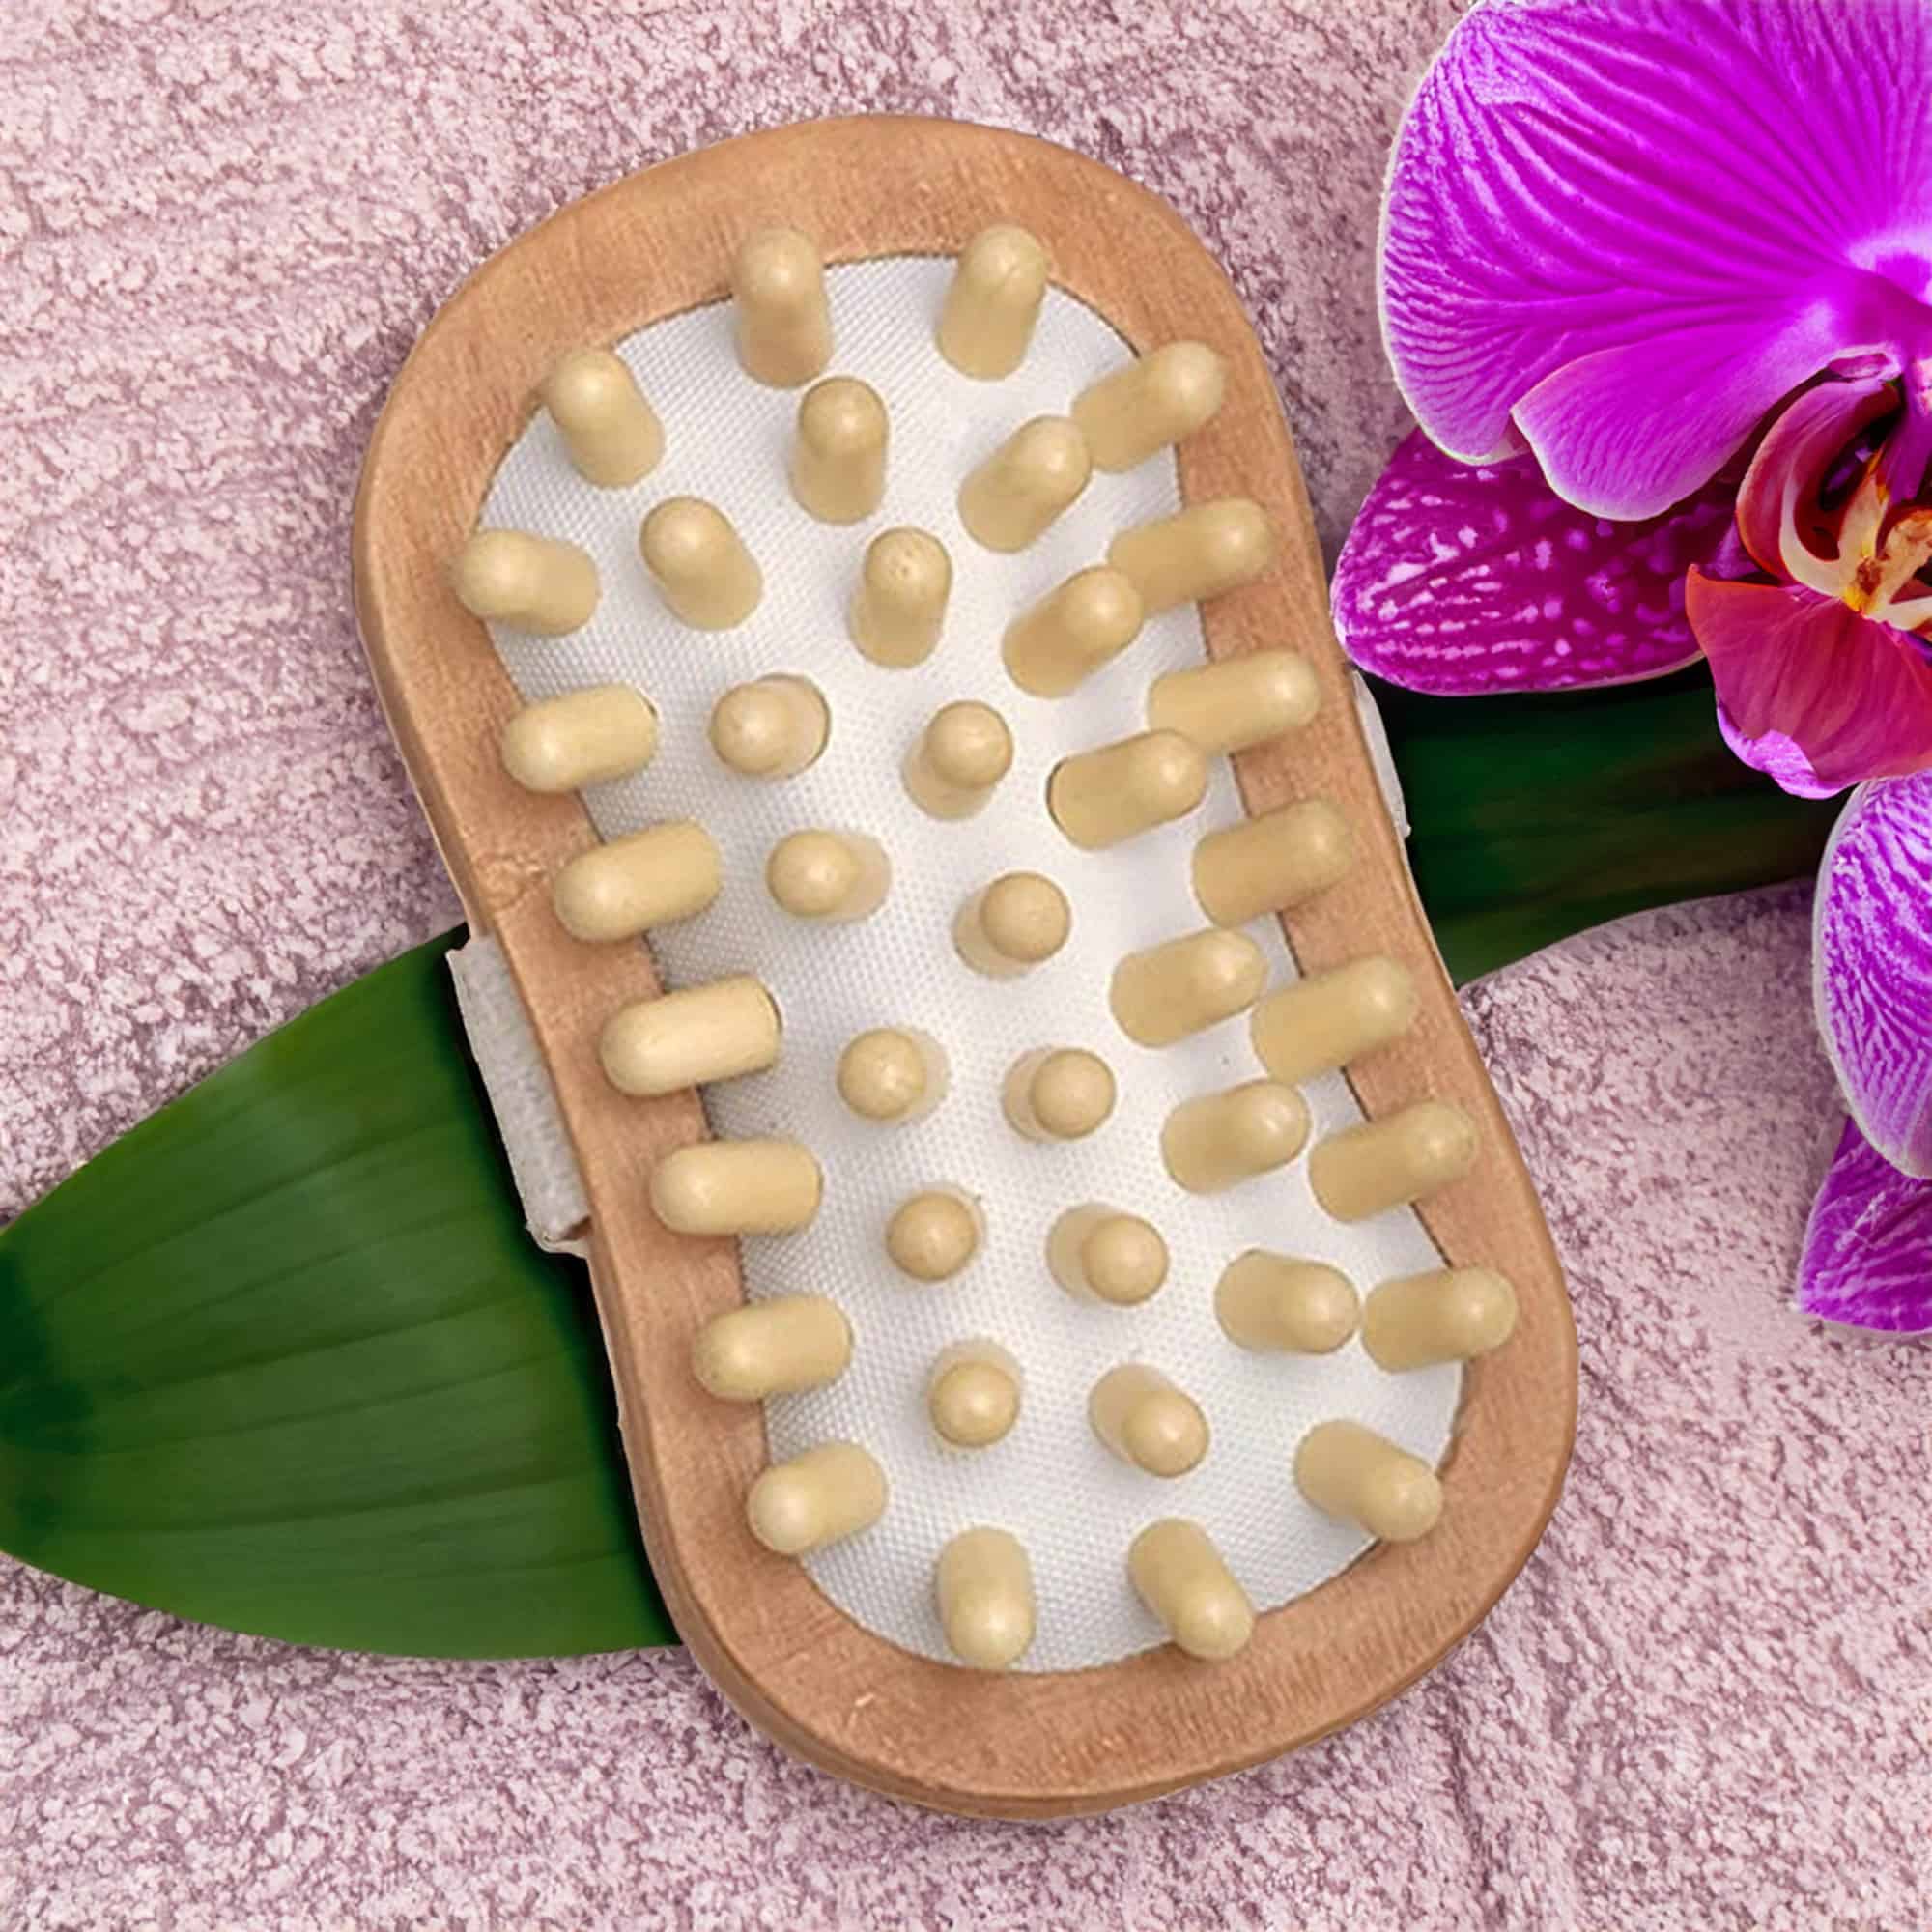 Body Care Massage Brush Well-Being Natural Wood handheld massager with rounded pegs on a soft towel, next to a purple orchid flower.